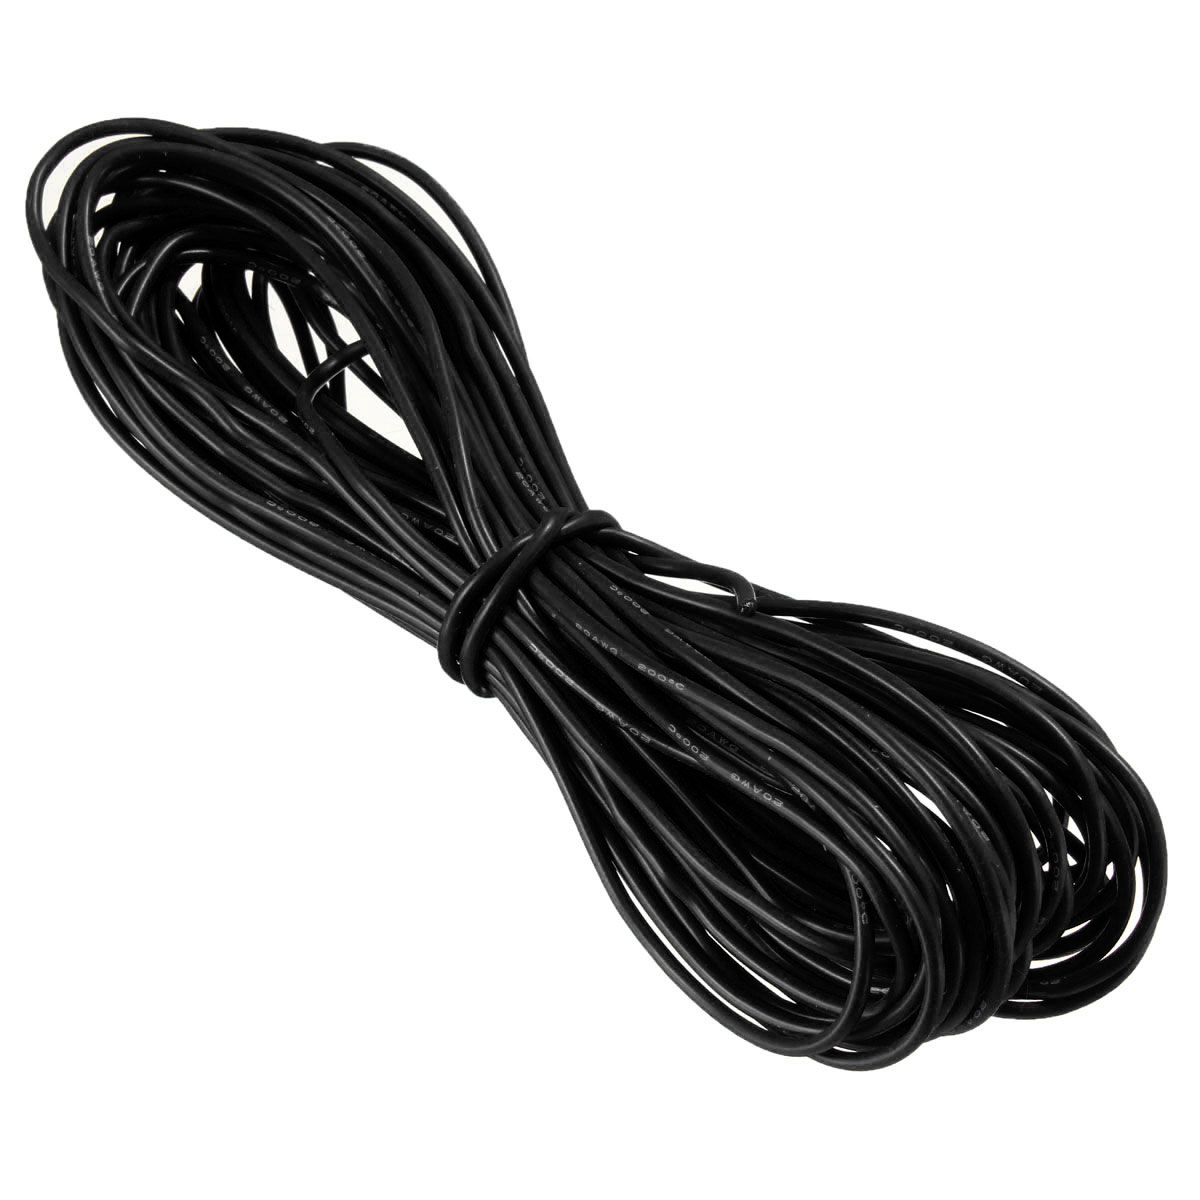 DANIU-10-Meter-Black-Silicone-Wire-Cable-10121416182022AWG-Flexible-Cable-1170303-6